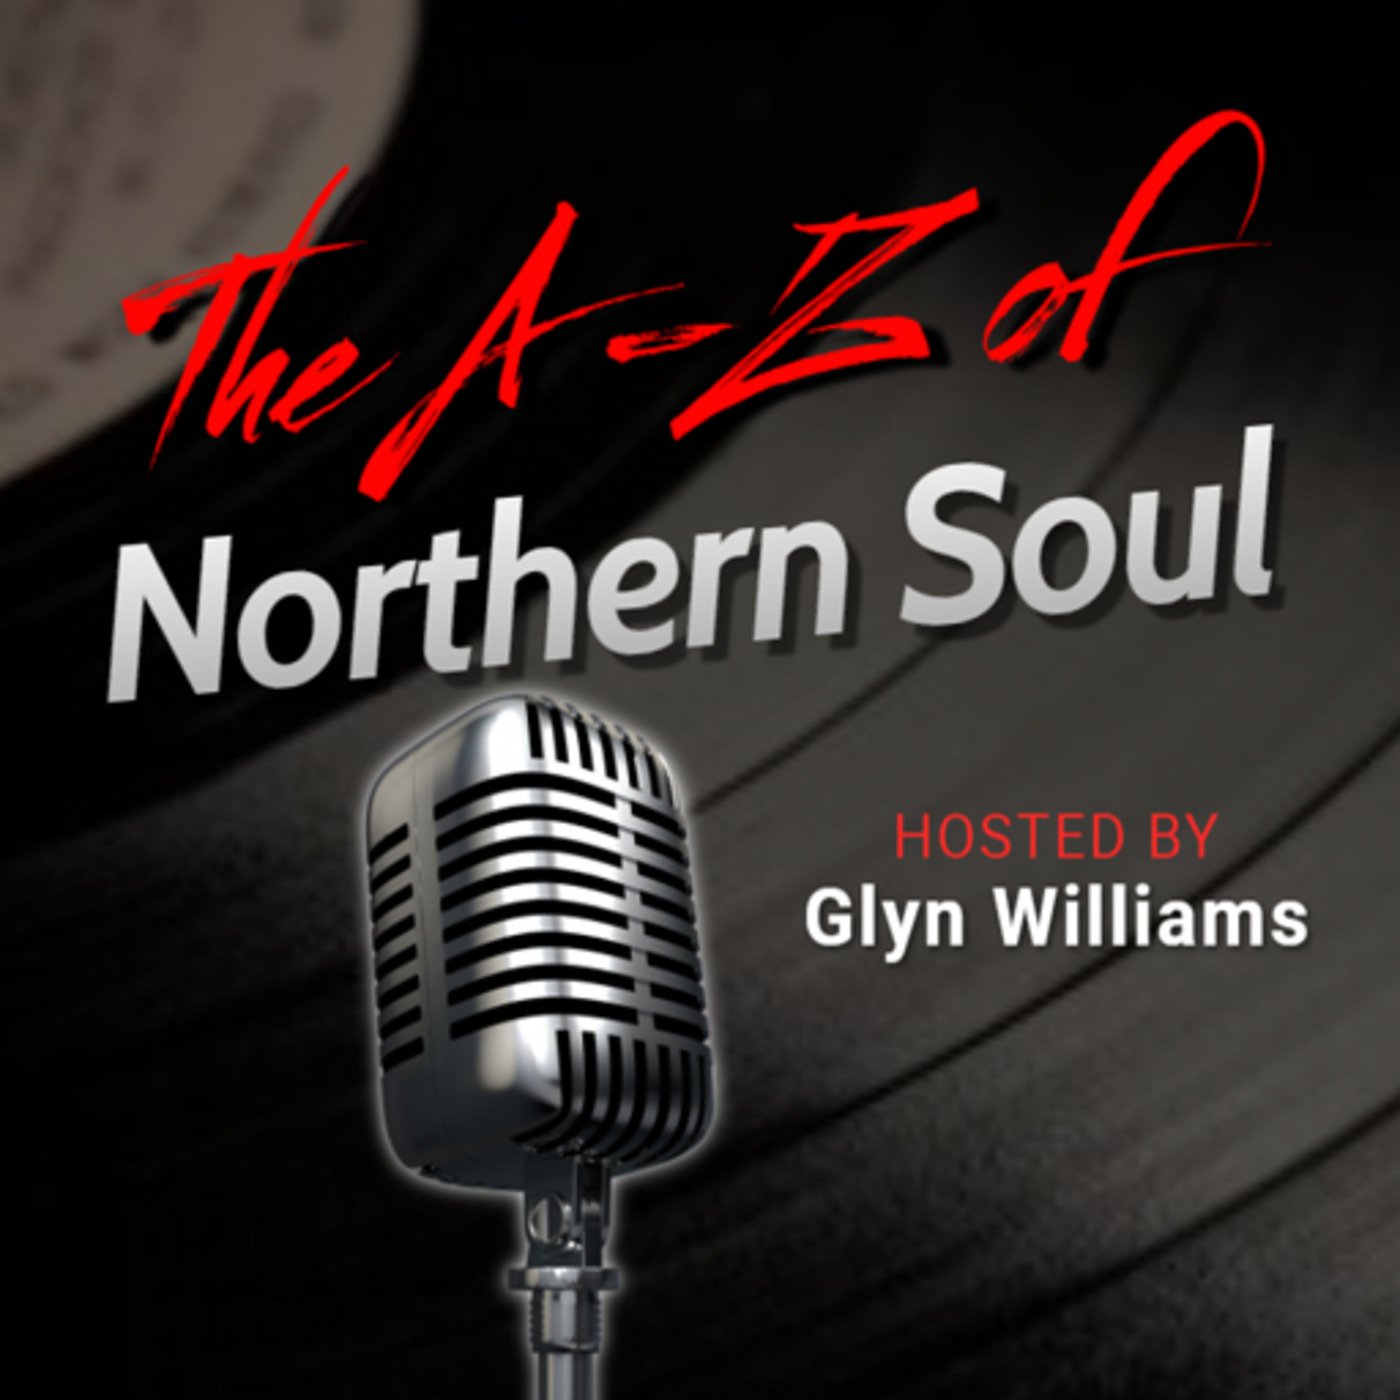 The A-Z of Northern Soul E059